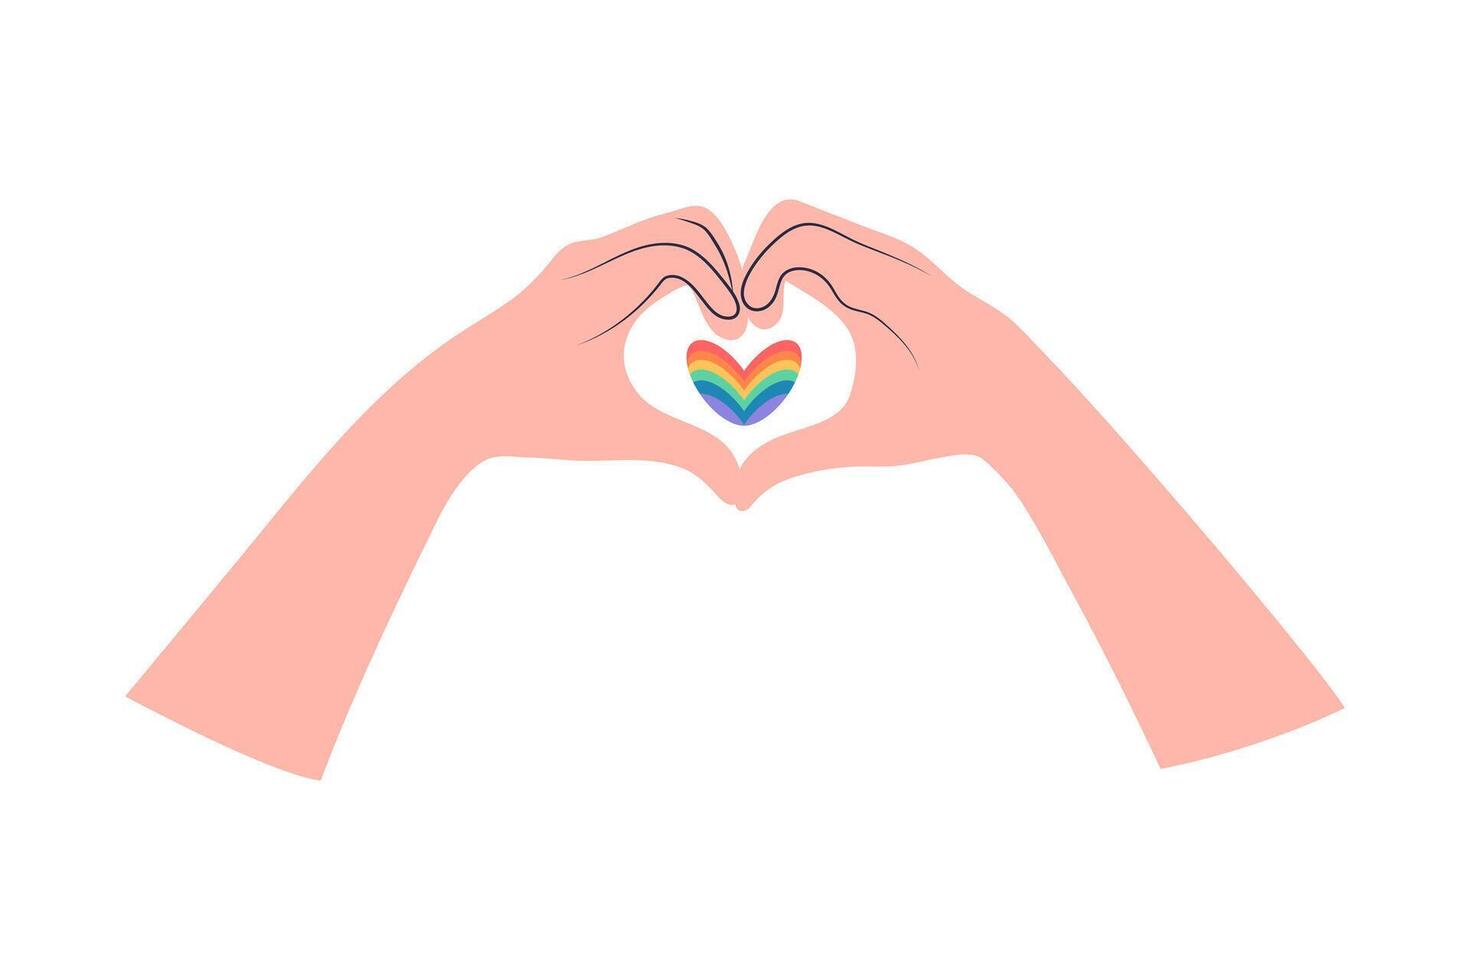 Two hands making heart sign and rainbow heart between. Love gesture. Rainbow colors of LGBT pride flag. vector